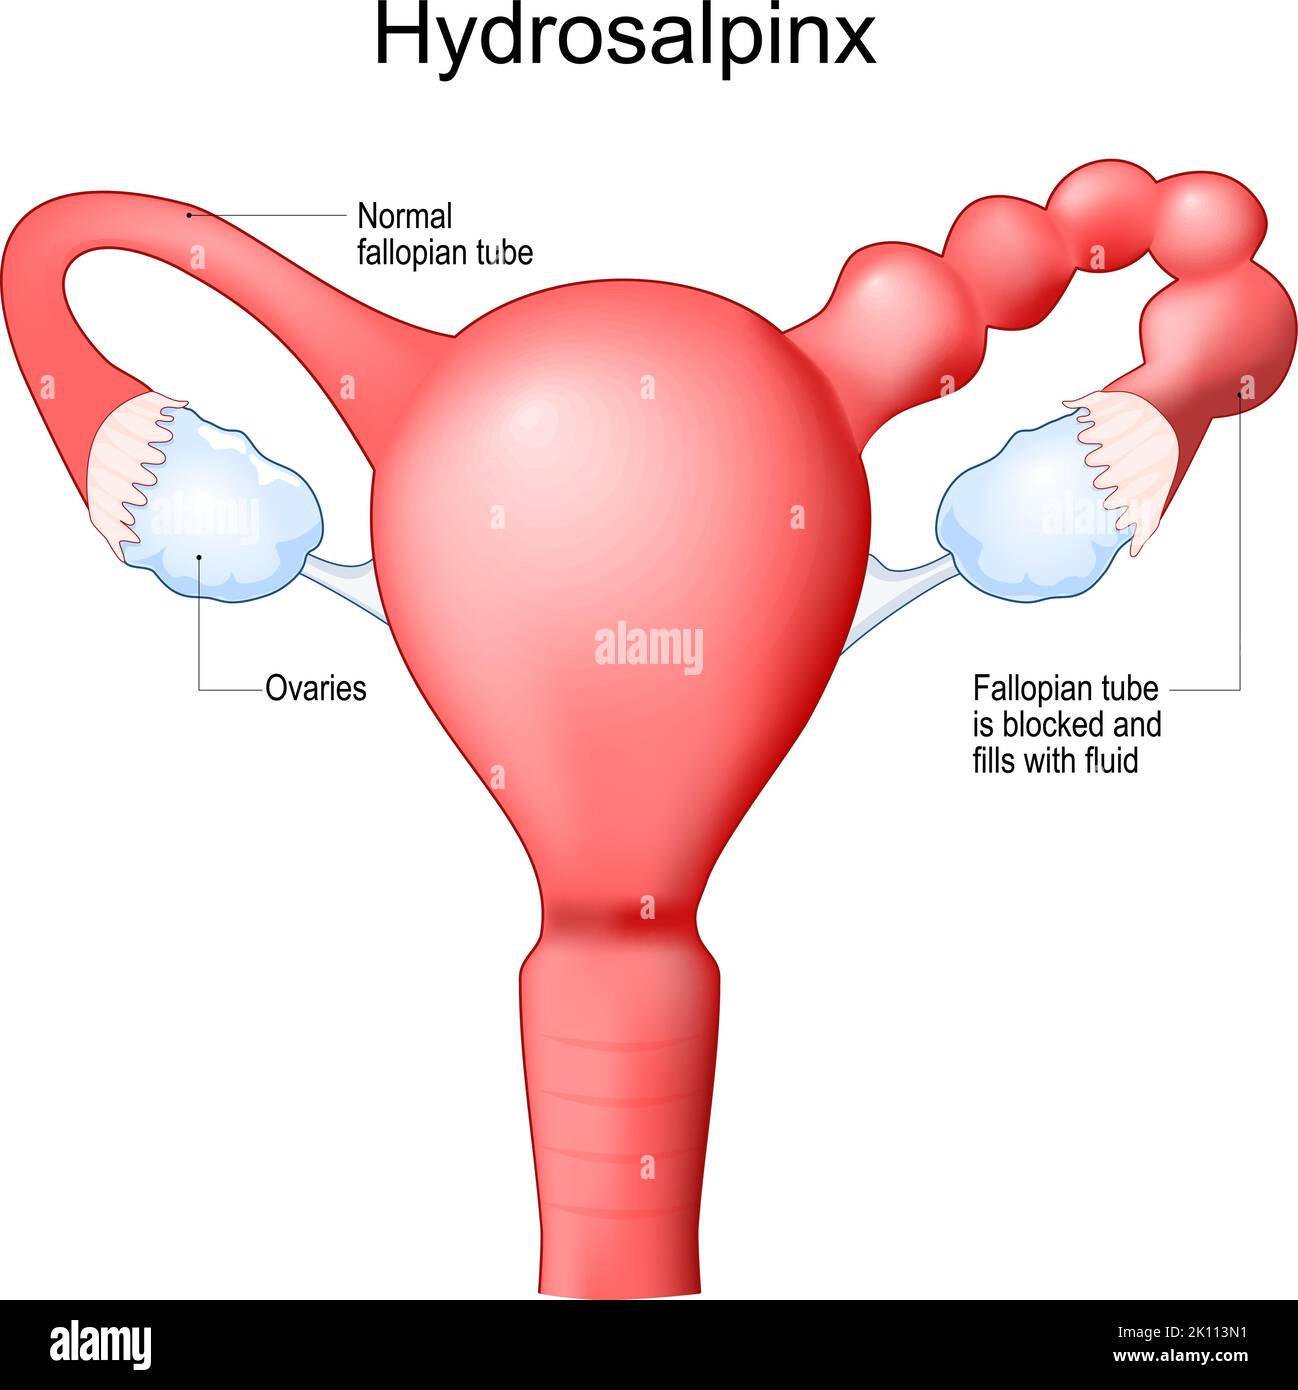 Human uterus with blocked of Fallopian tube. Hydrosalpinx cause infertility. Female reproductive system. Frontal view. Human anatomy. Realistic medica Stock Vector